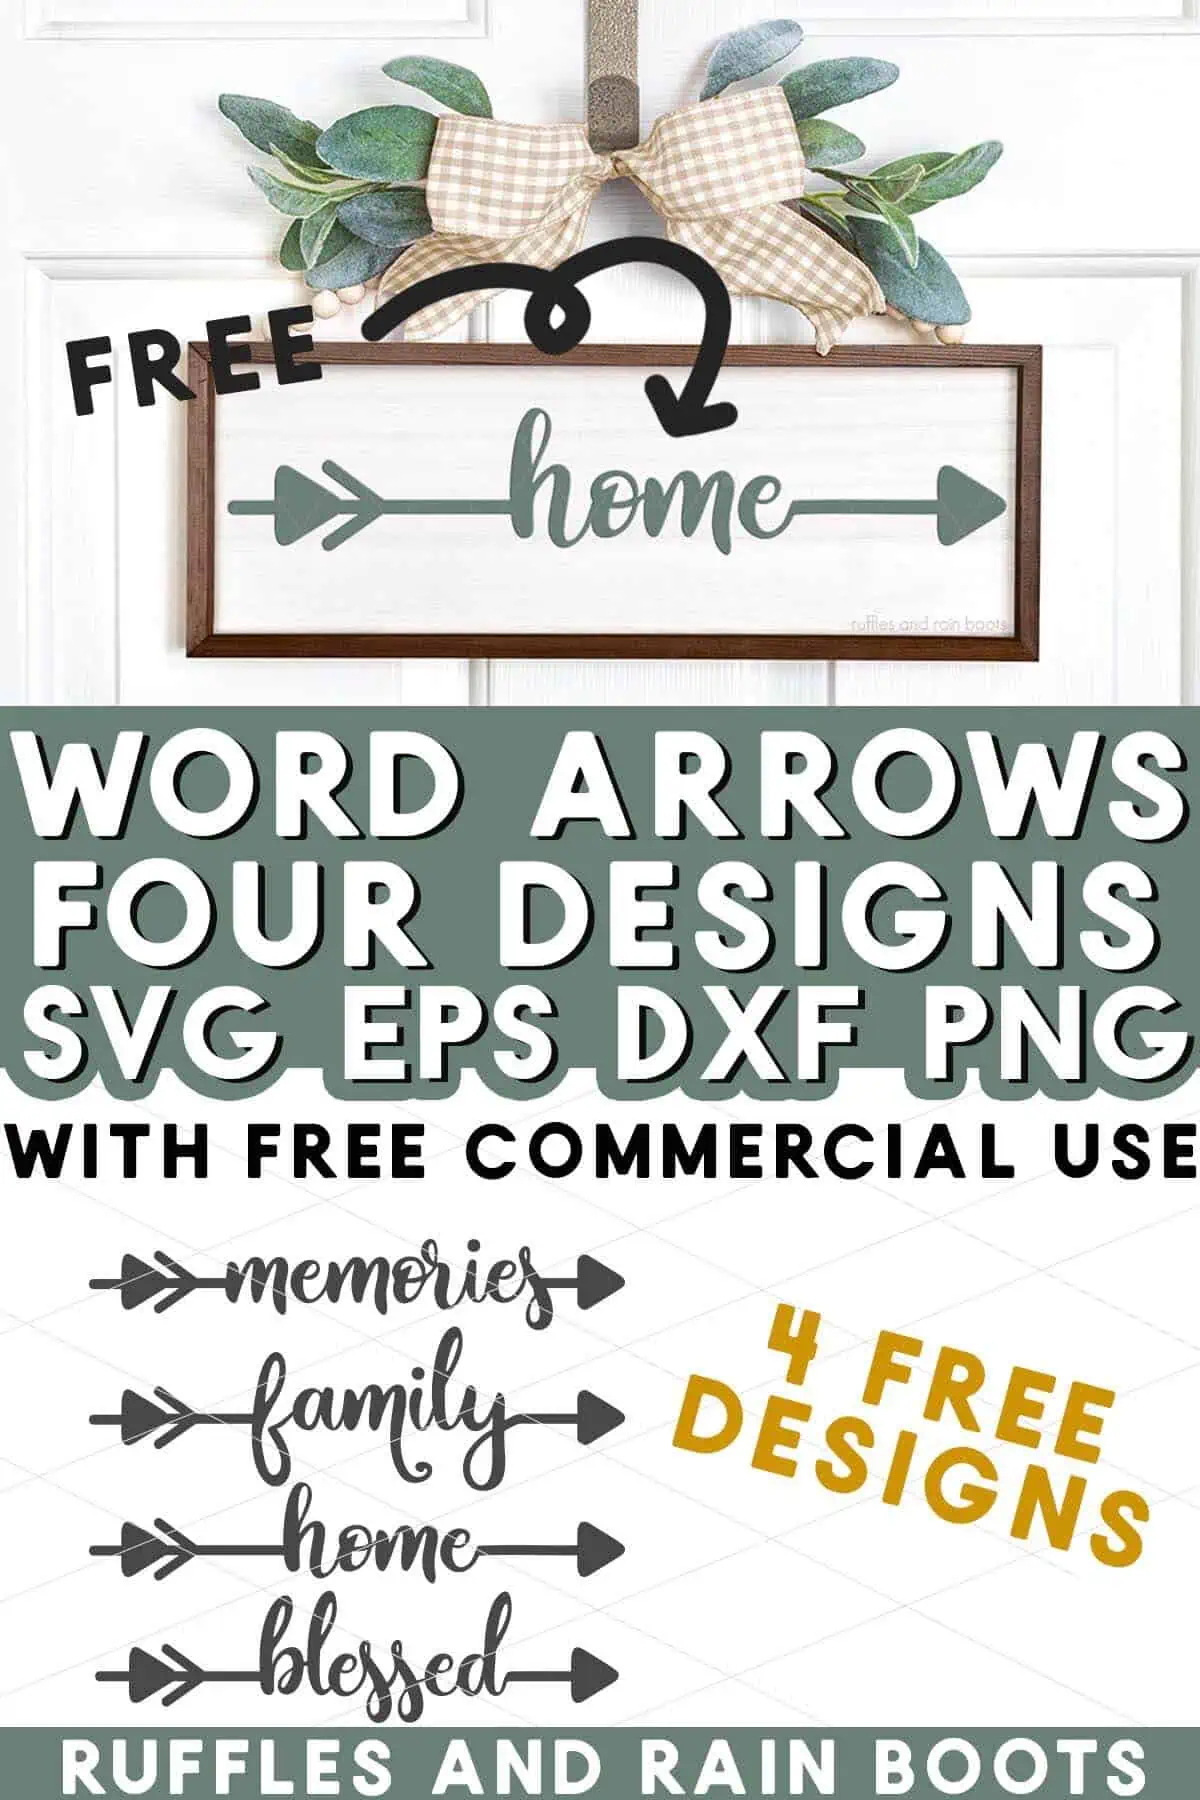 Split vertical collage with home word arrow SVG hung on door with bow and greenery.